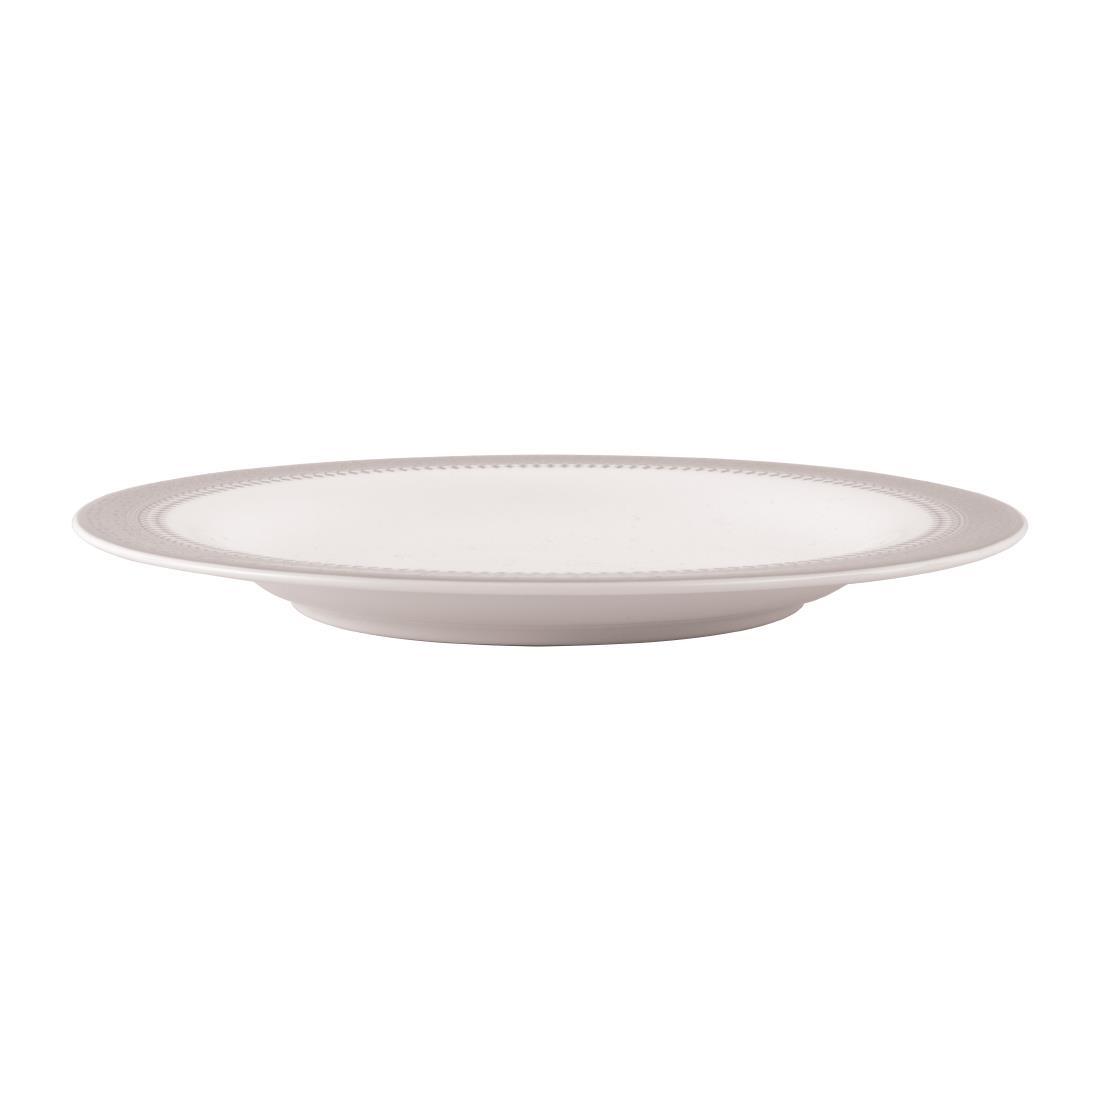 Royal Bone Afternoon Tea Couronne Plate 165mm (Pack of 12) - FB742  - 3